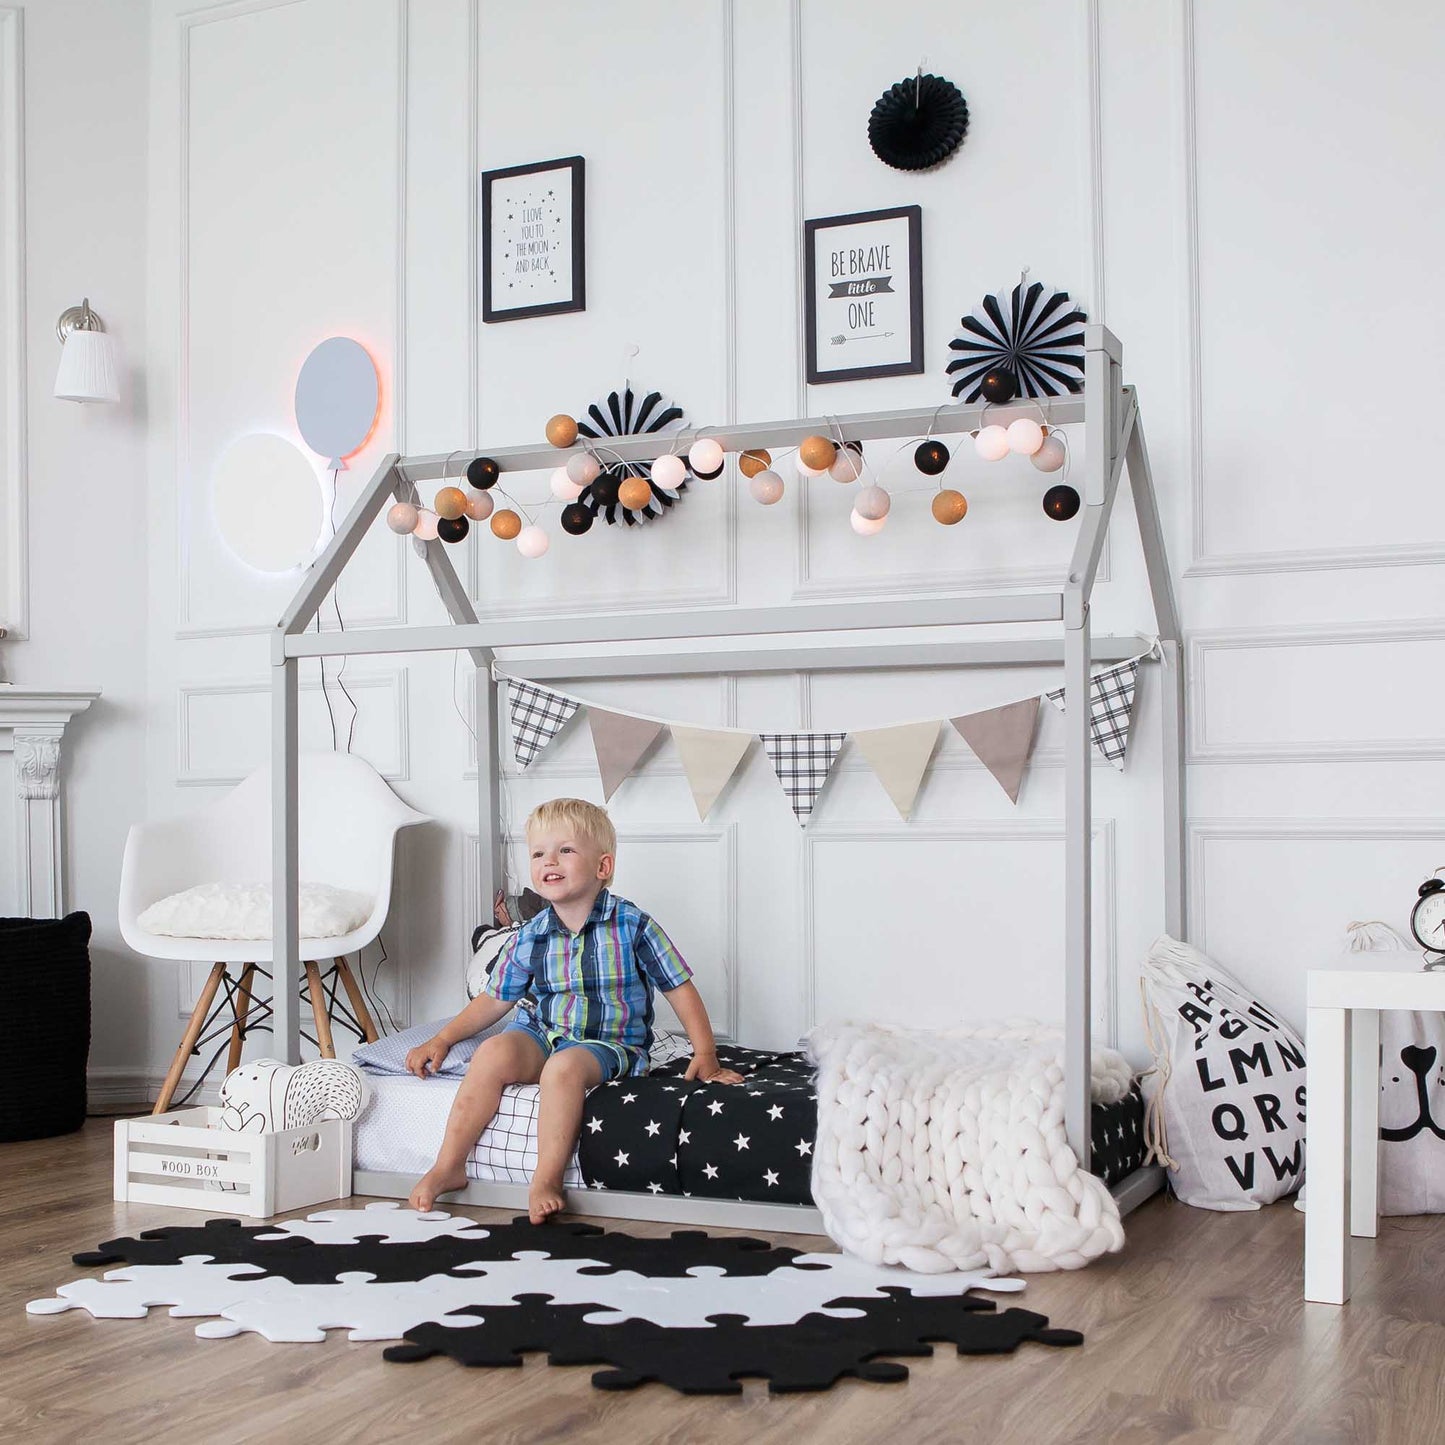 A child is sitting on a Sweet Home From Wood Wooden zero-clearance house bed in a room with black and white decorations.